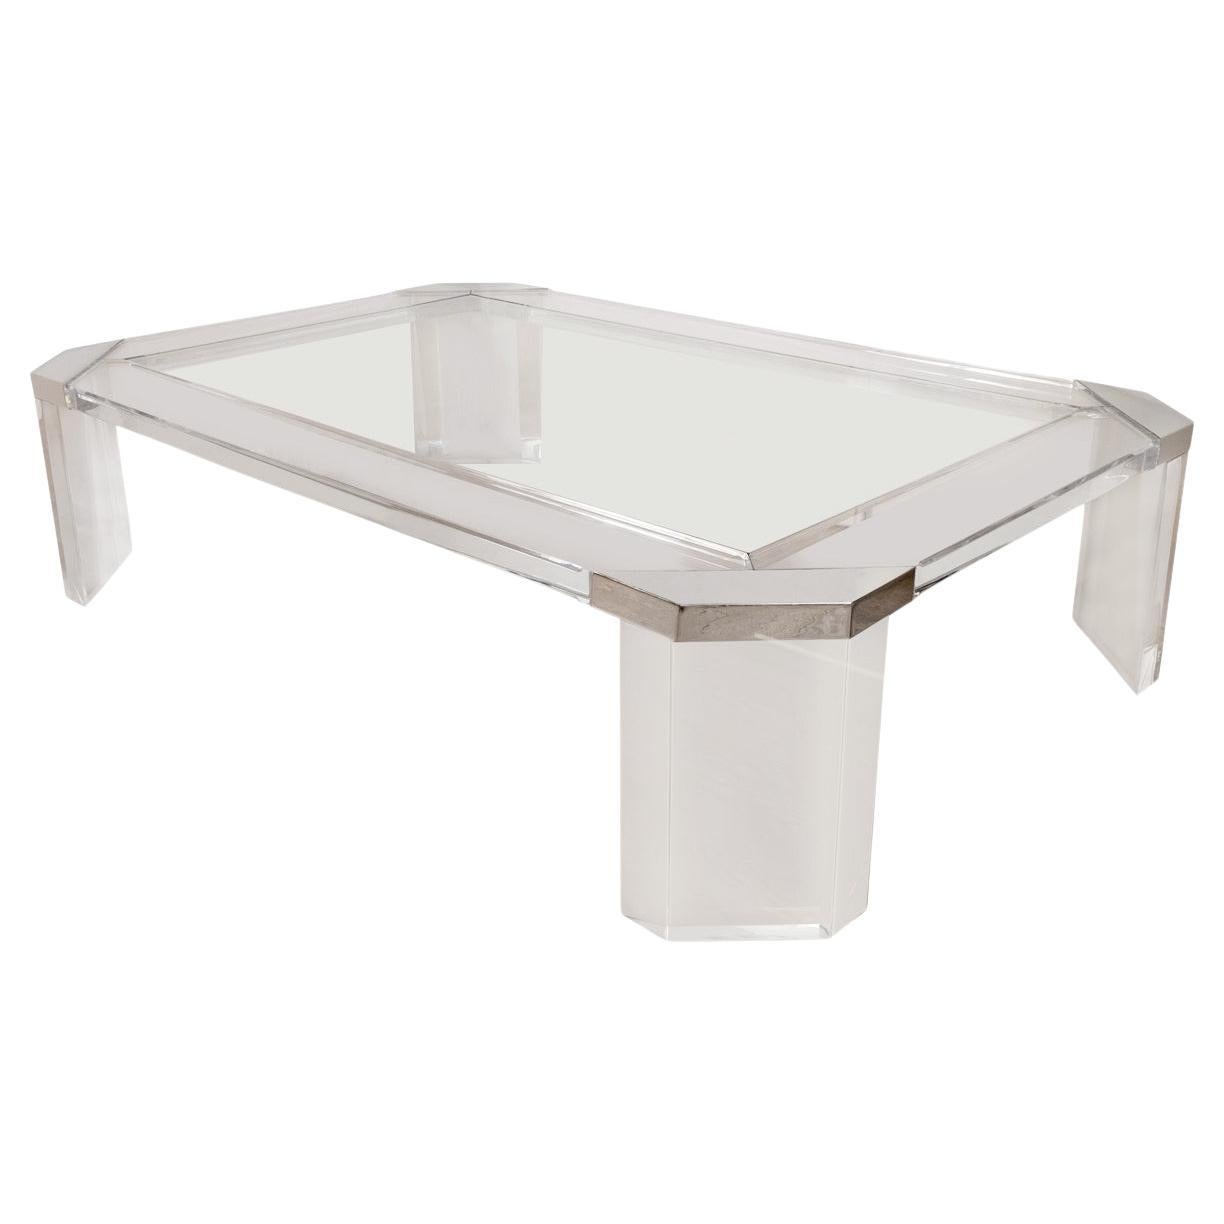 Octagonal lucite and glass coffee table  For Sale